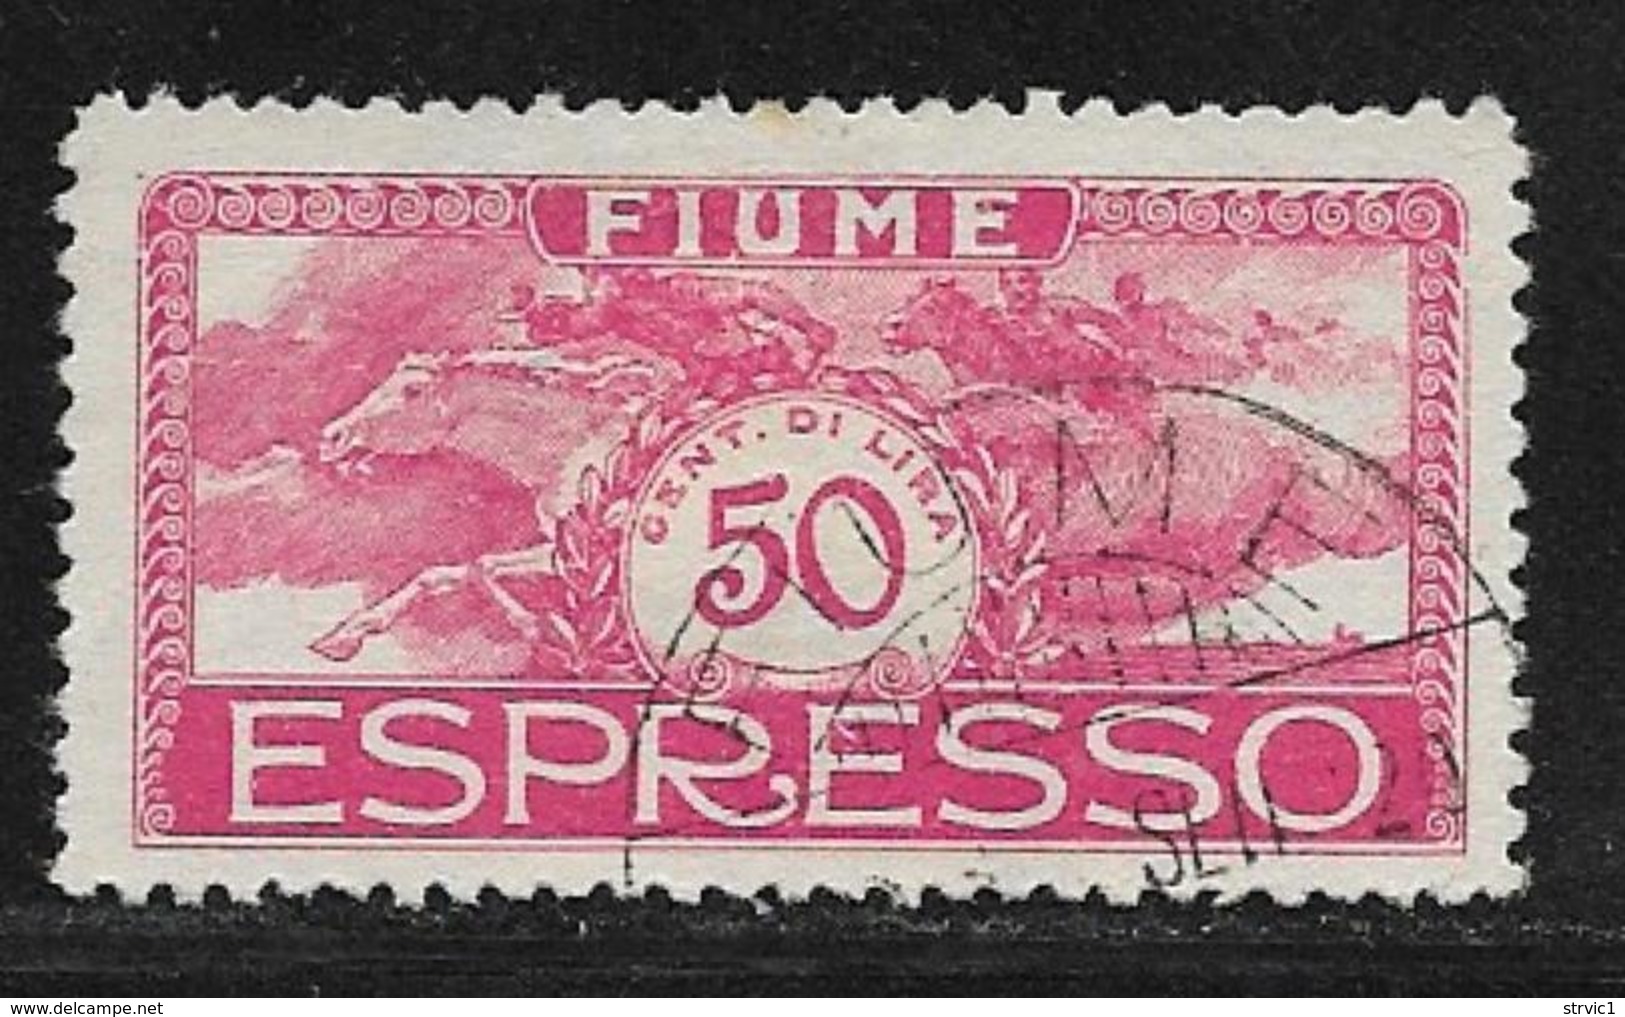 Fiume Scott # E3 Used Special Delivery Stamp, 1920,  CV$25.00, Tiny Hinge Thin - Fiume